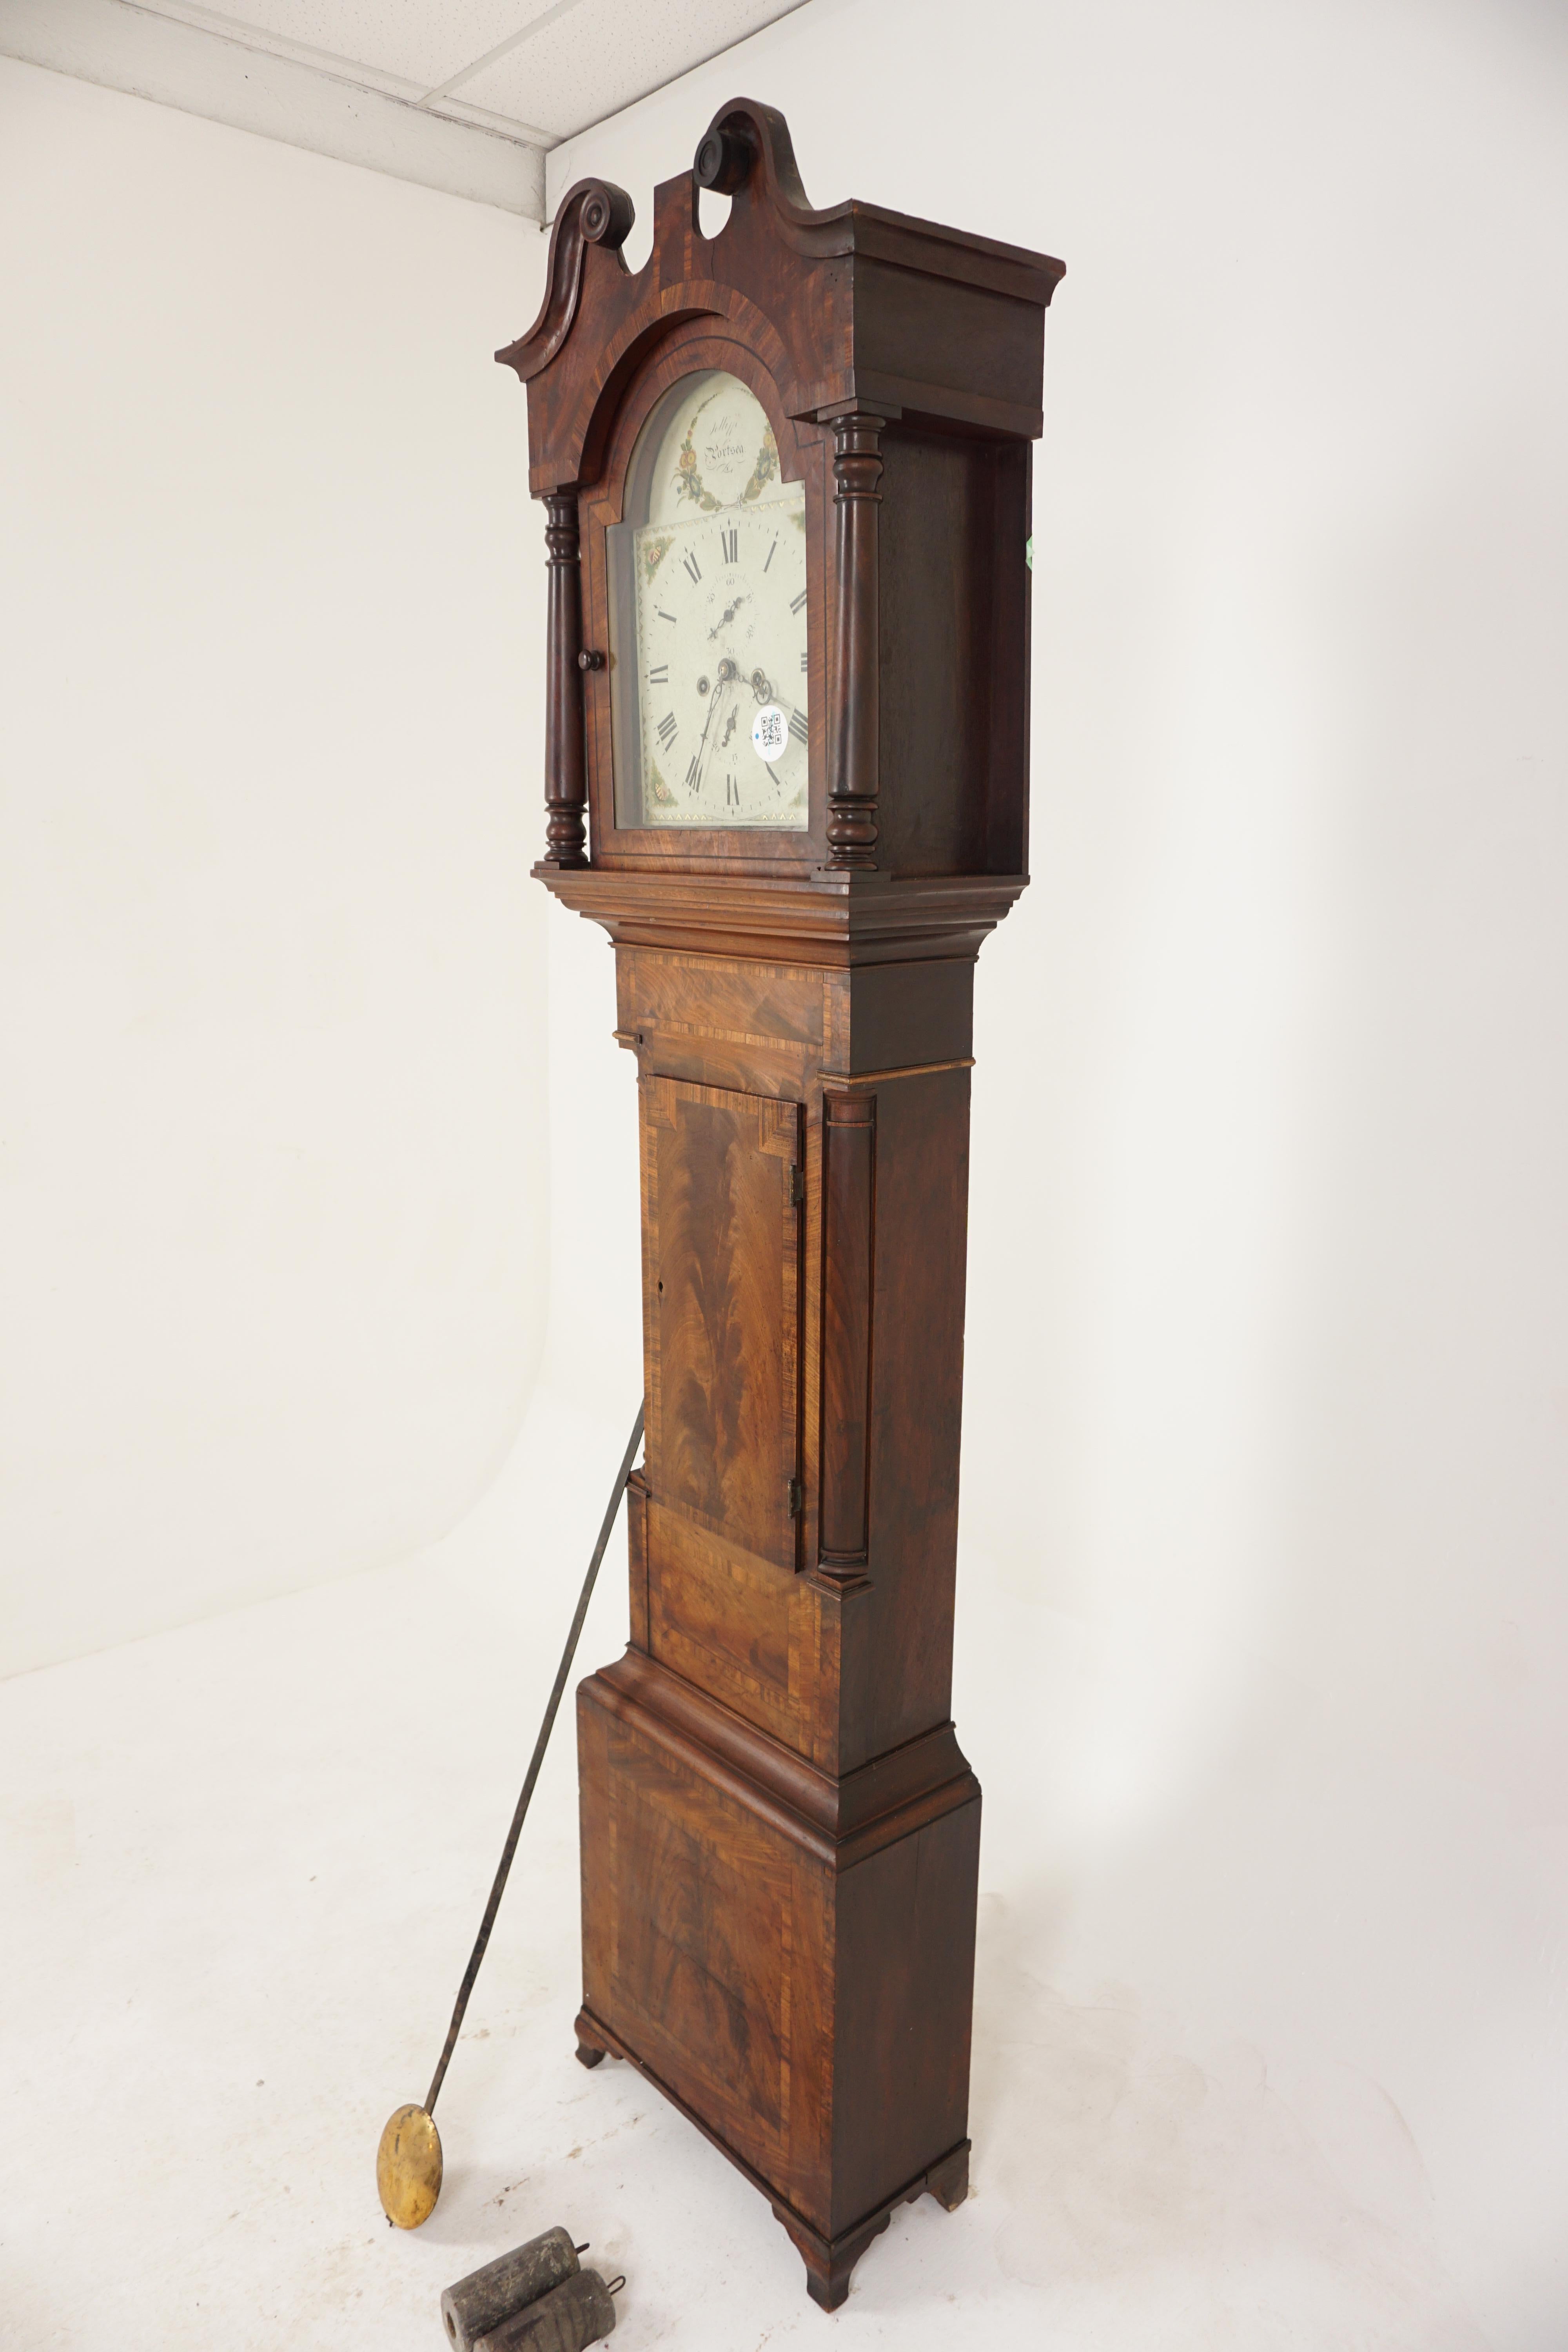 Antique Victorian Grandfather Long Case Clock by Jolliffe of Portsea, England 1870, H061

England 1870
Solid Walnut
Original Finish
Swan neck pediment attractive decorative arch painted dial with a date and second dial
The arch with a floral wreath